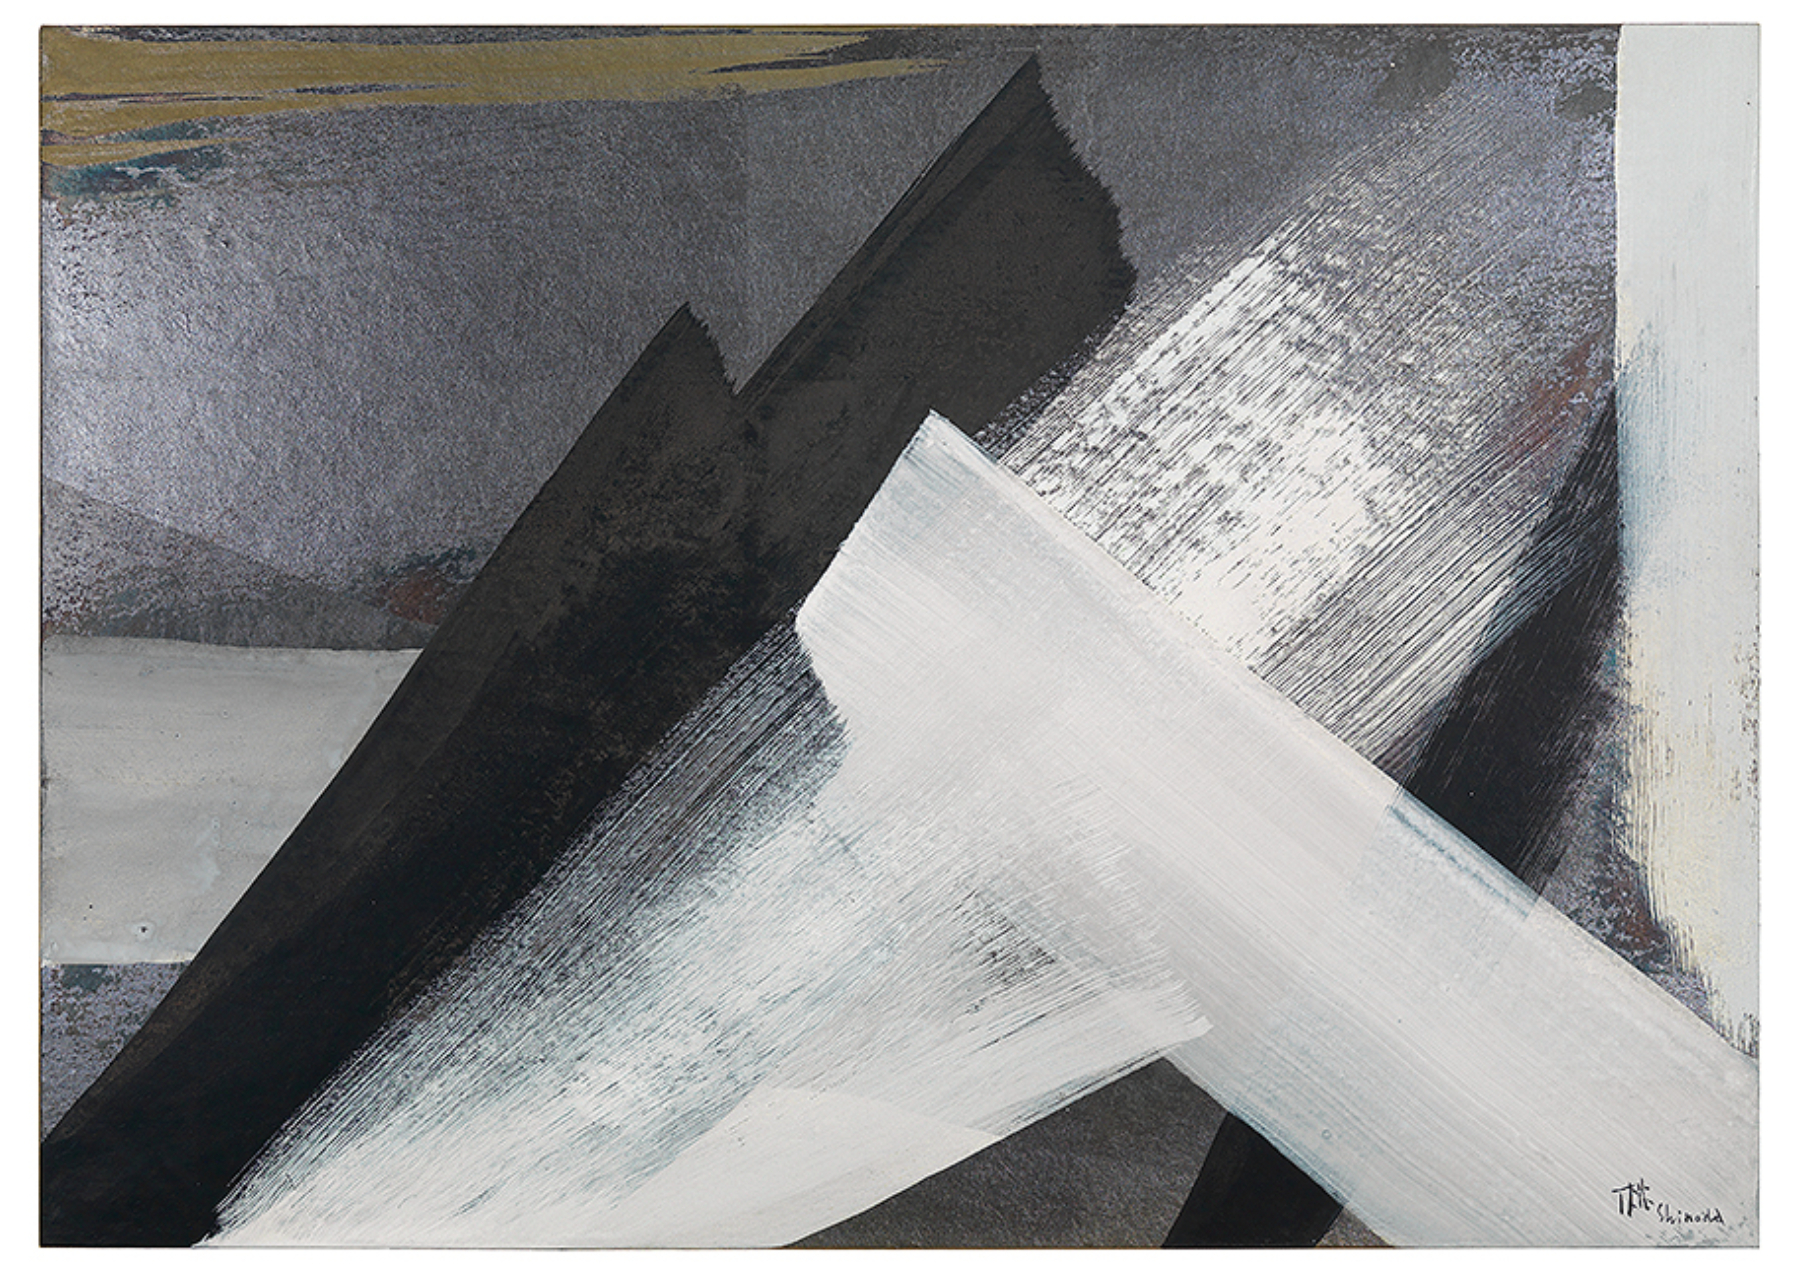 abstract; silver and gold ground with a small amount of bronze with wide slashes of black, medium gray and light gray overlapping diagonals